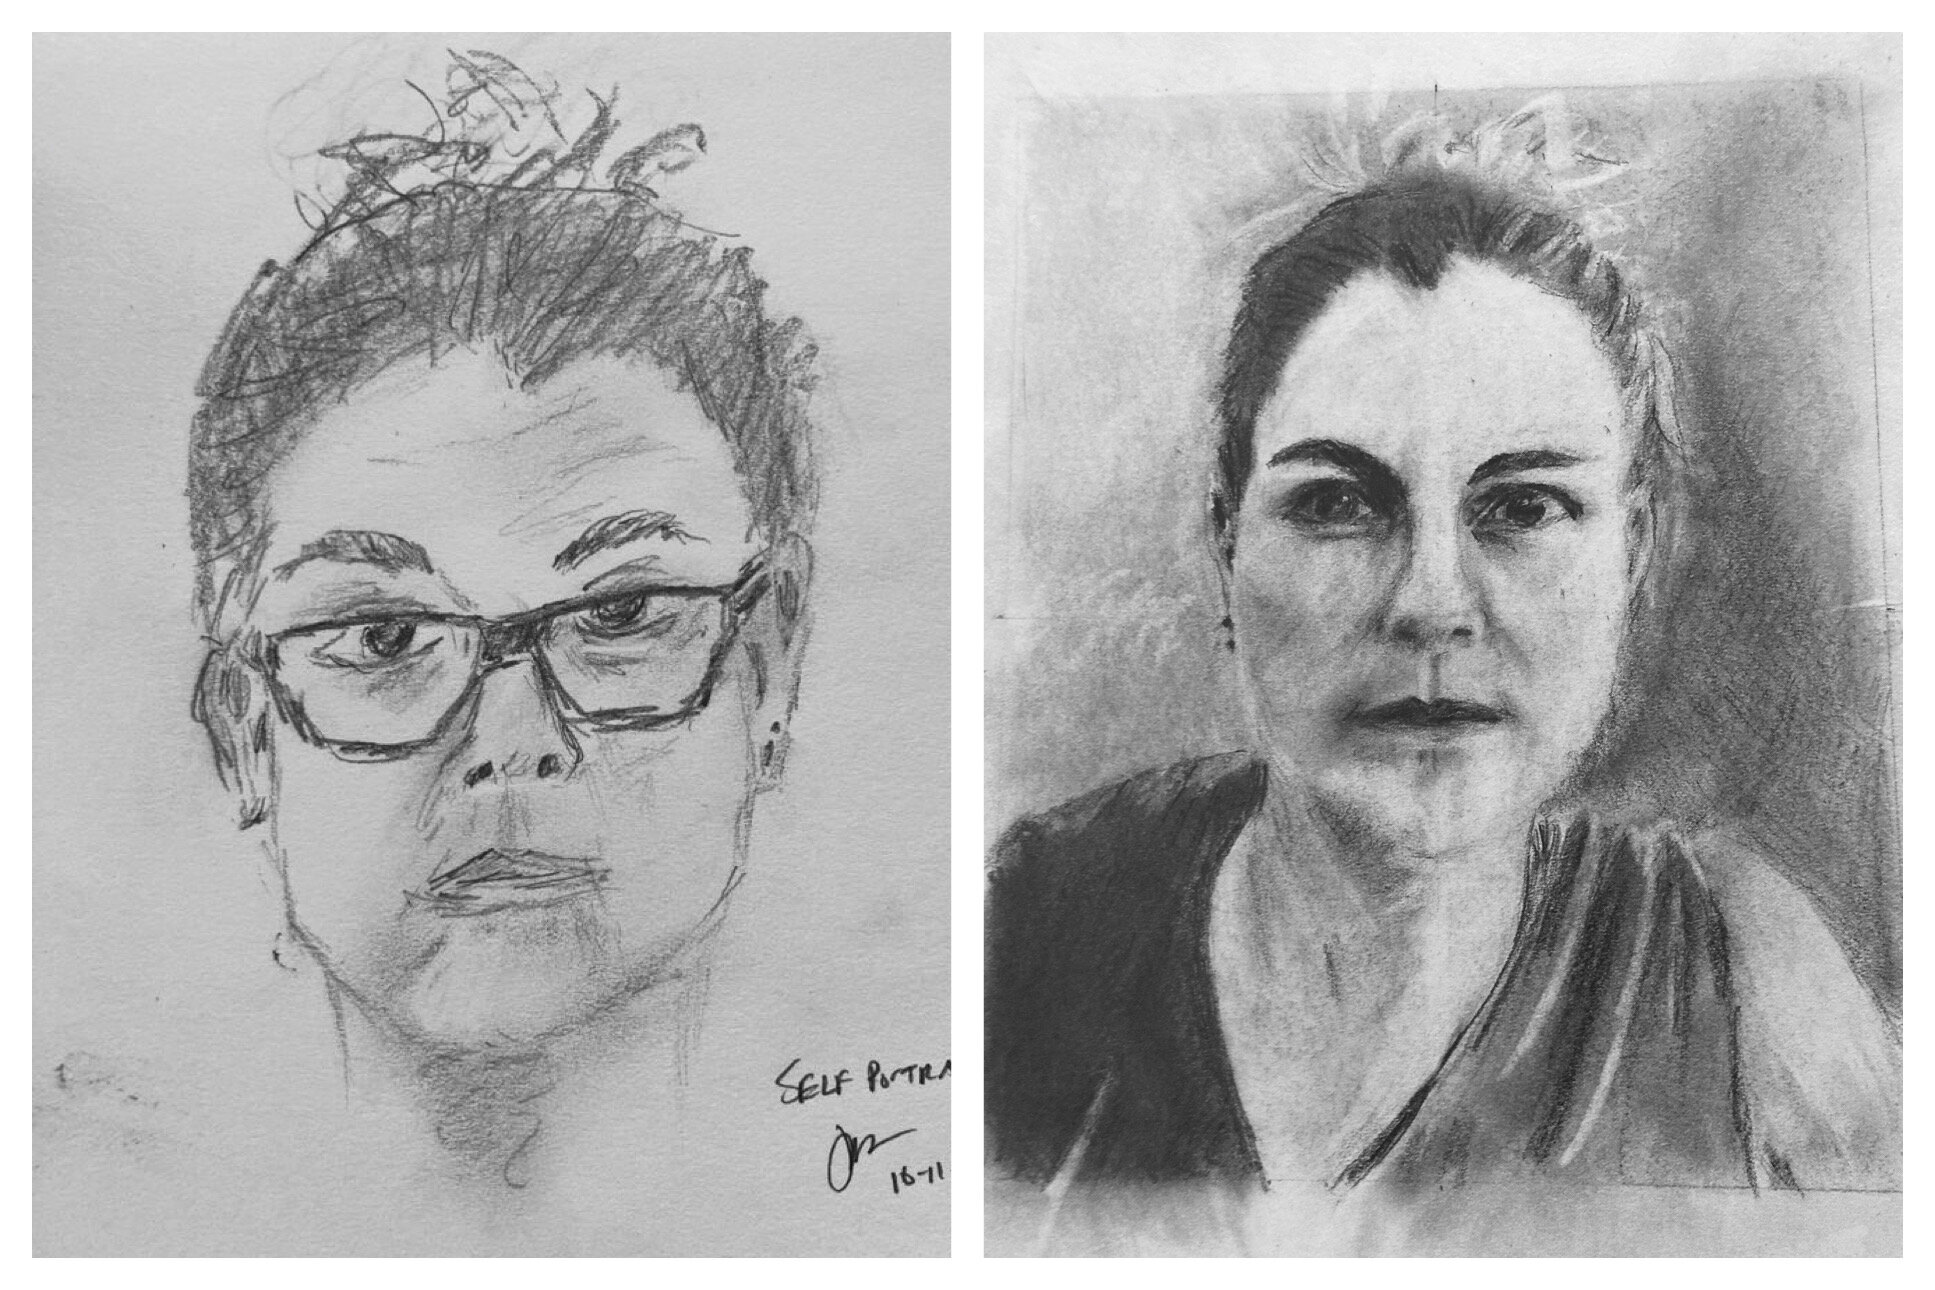 Joan's Before and After Self Portrait Drawings Oct 11-6, 2021